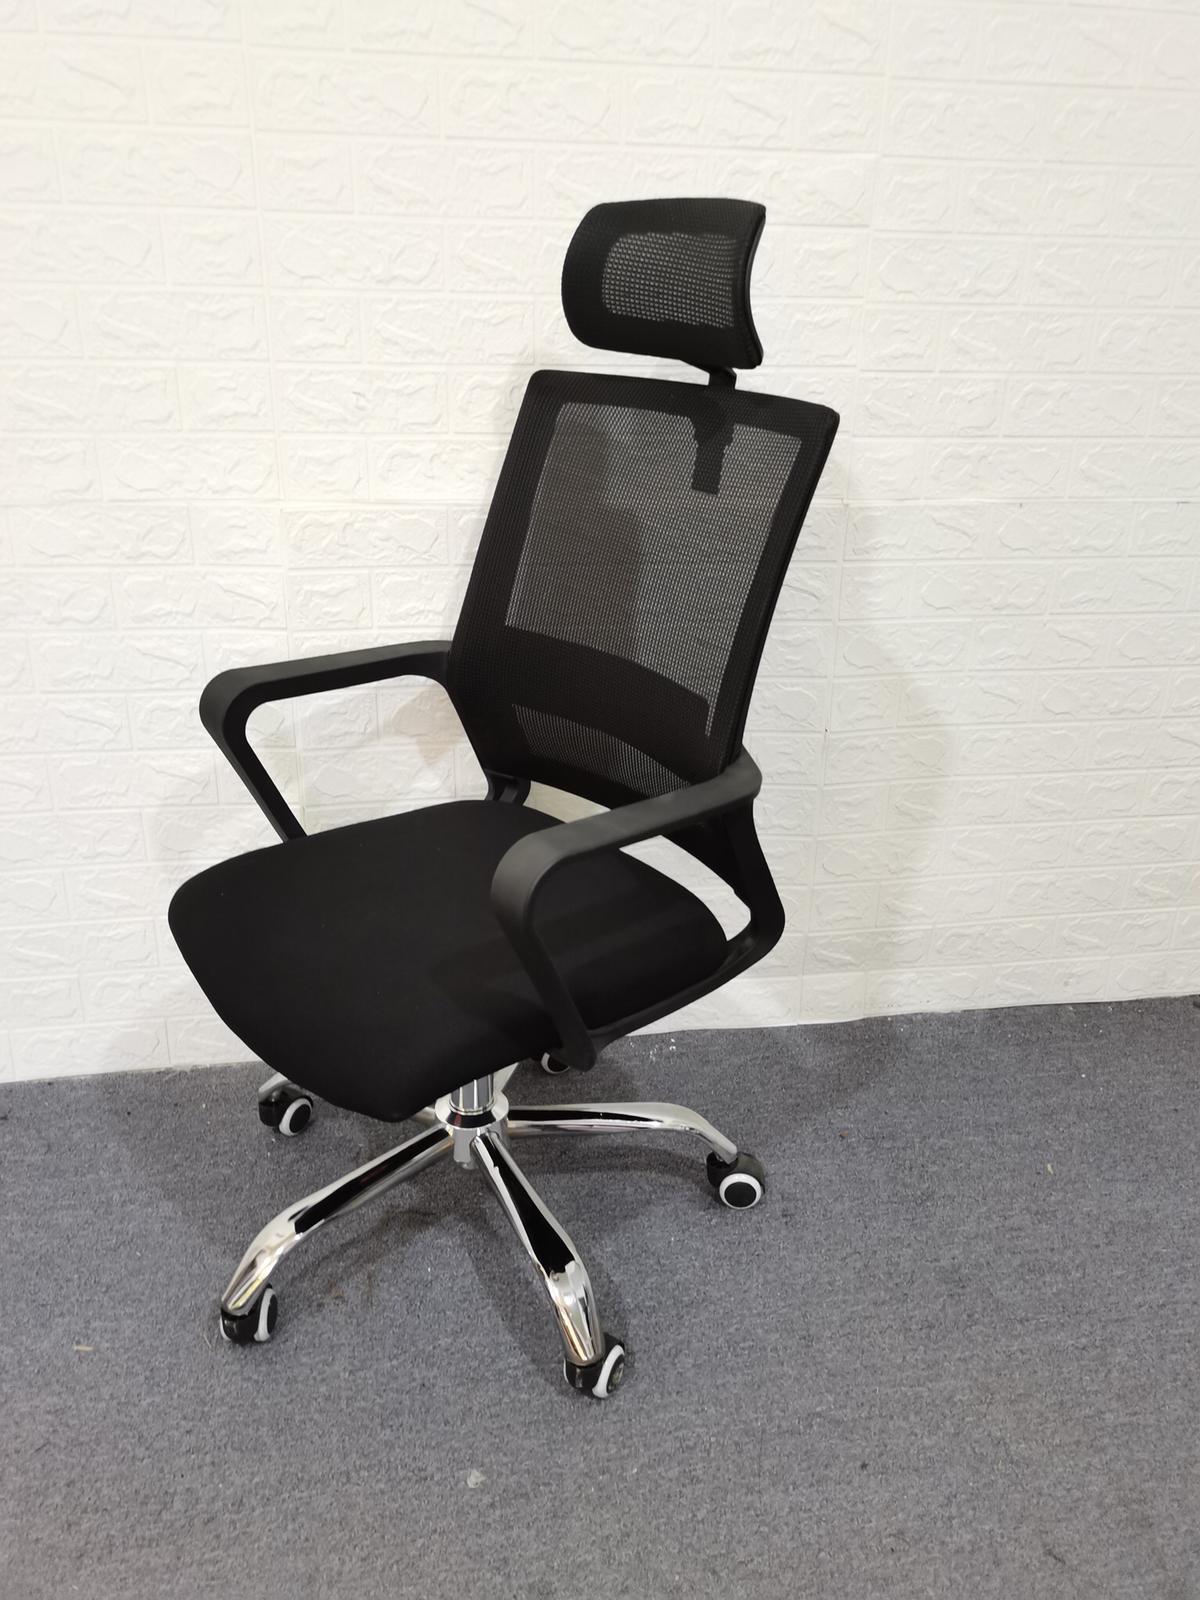 Ergonomic Mesh Office Chair, High Back Desk Chair - Adjustable Headrest and Height, Fixed Armrest -  Tilt Function, Comfortable Back Support and Roller Wheels, Swivel Computer Task Chair - image 2 of 5